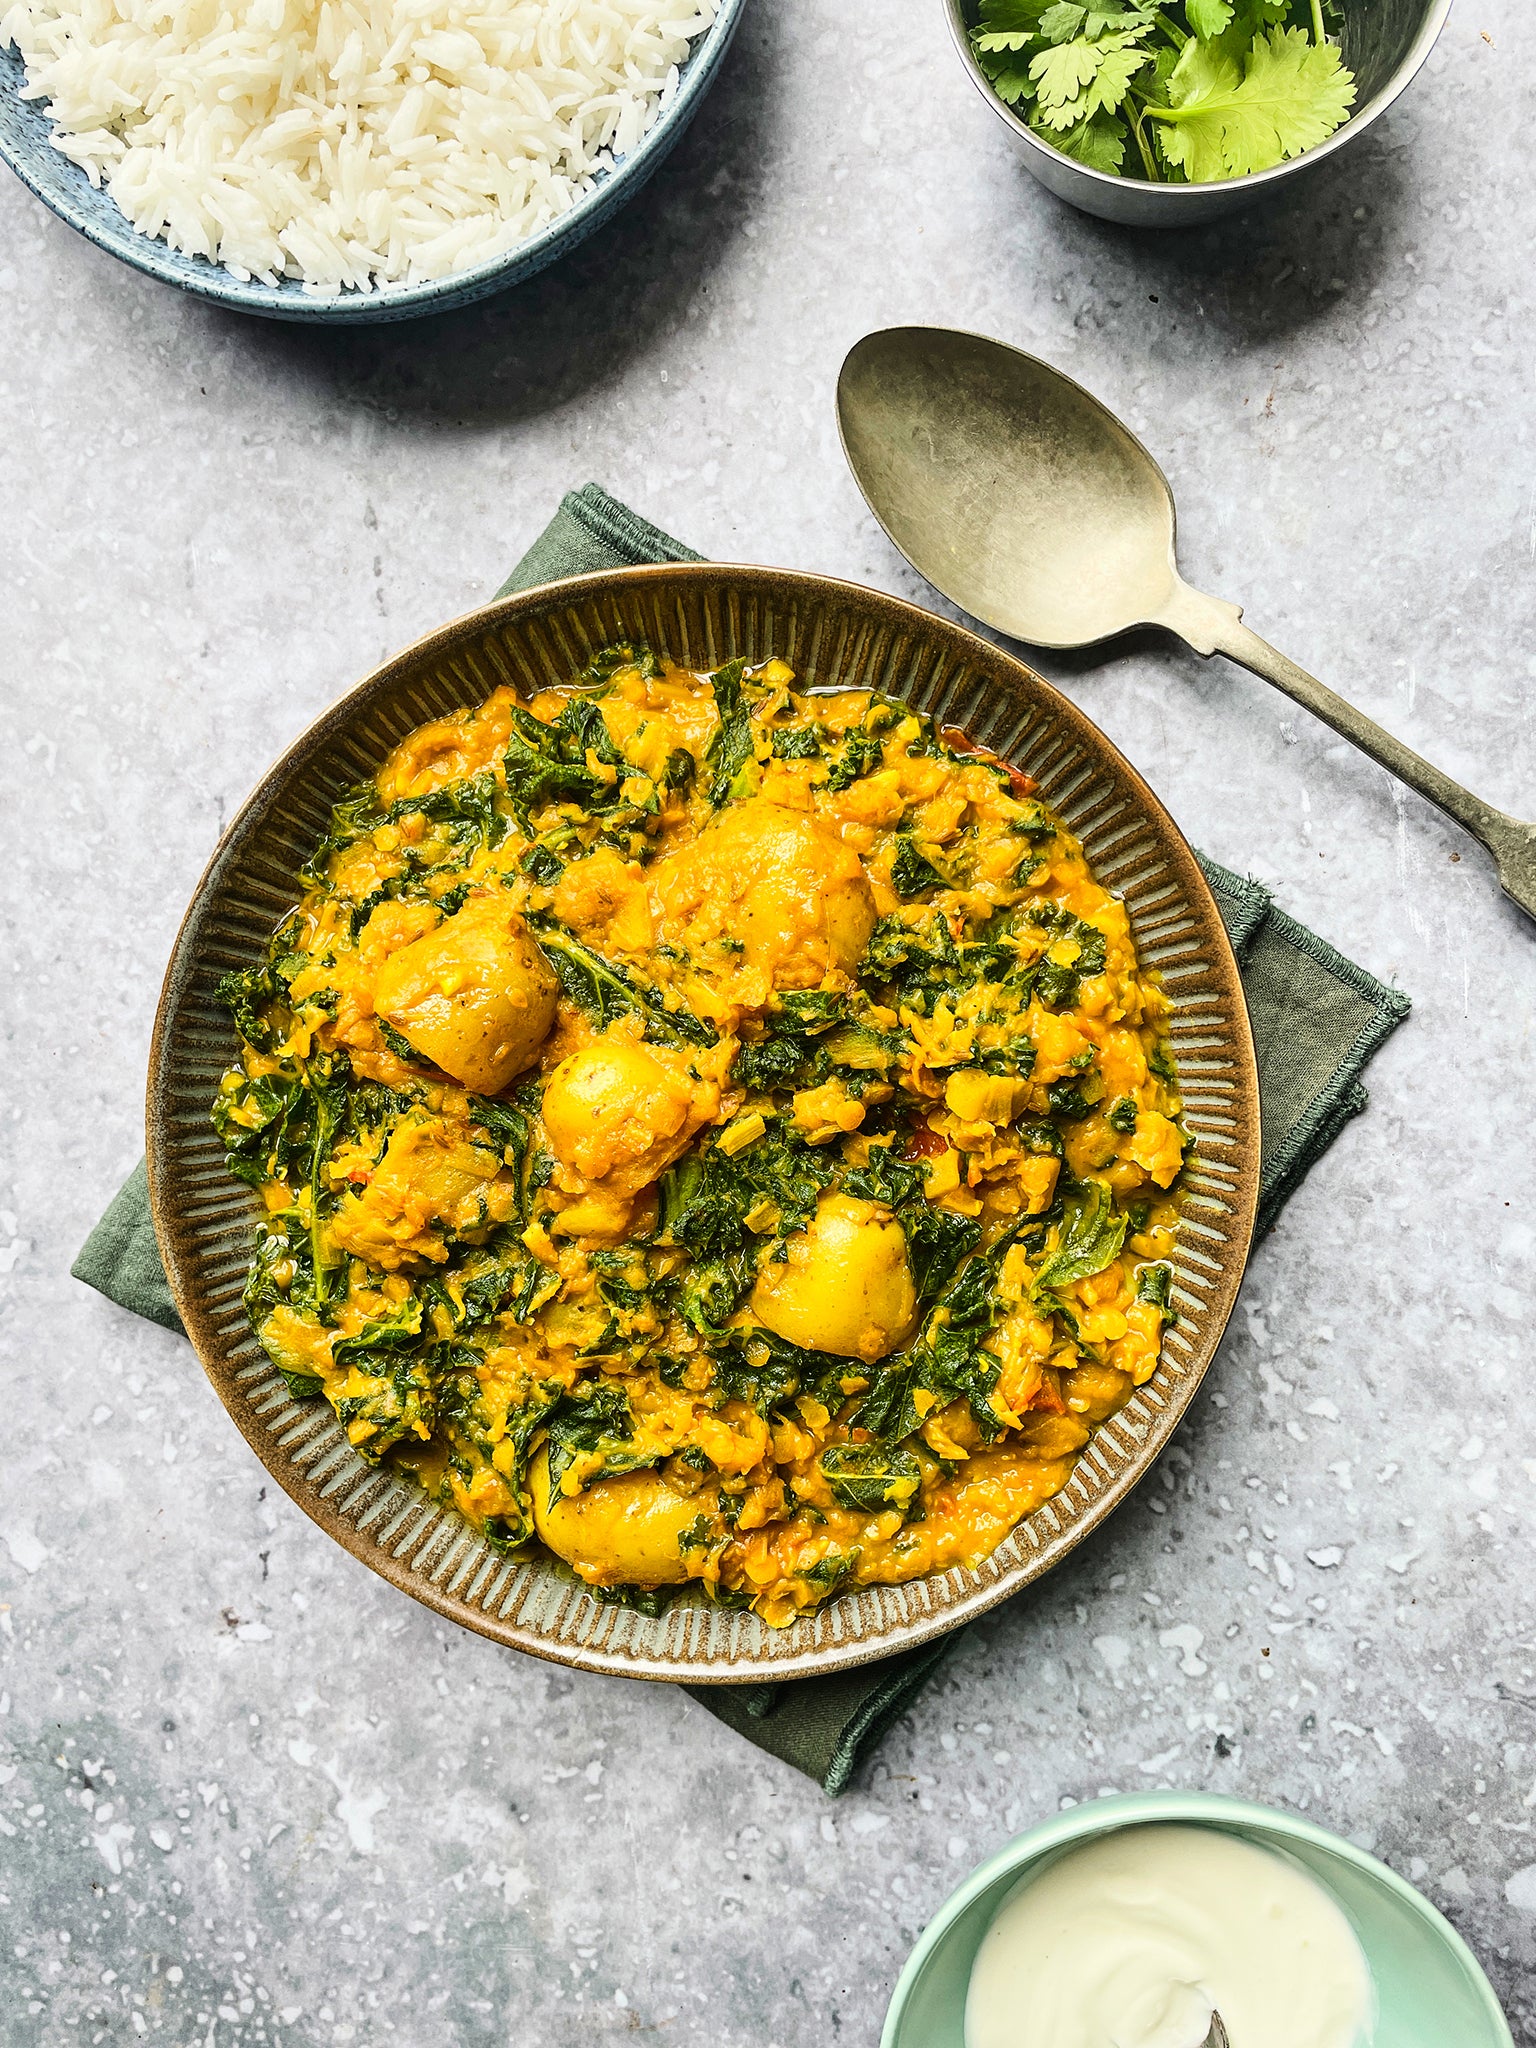 Creamy Potato and Kale Curry is perfect for cooking in large batches as it can be made ahead of time and frozen.